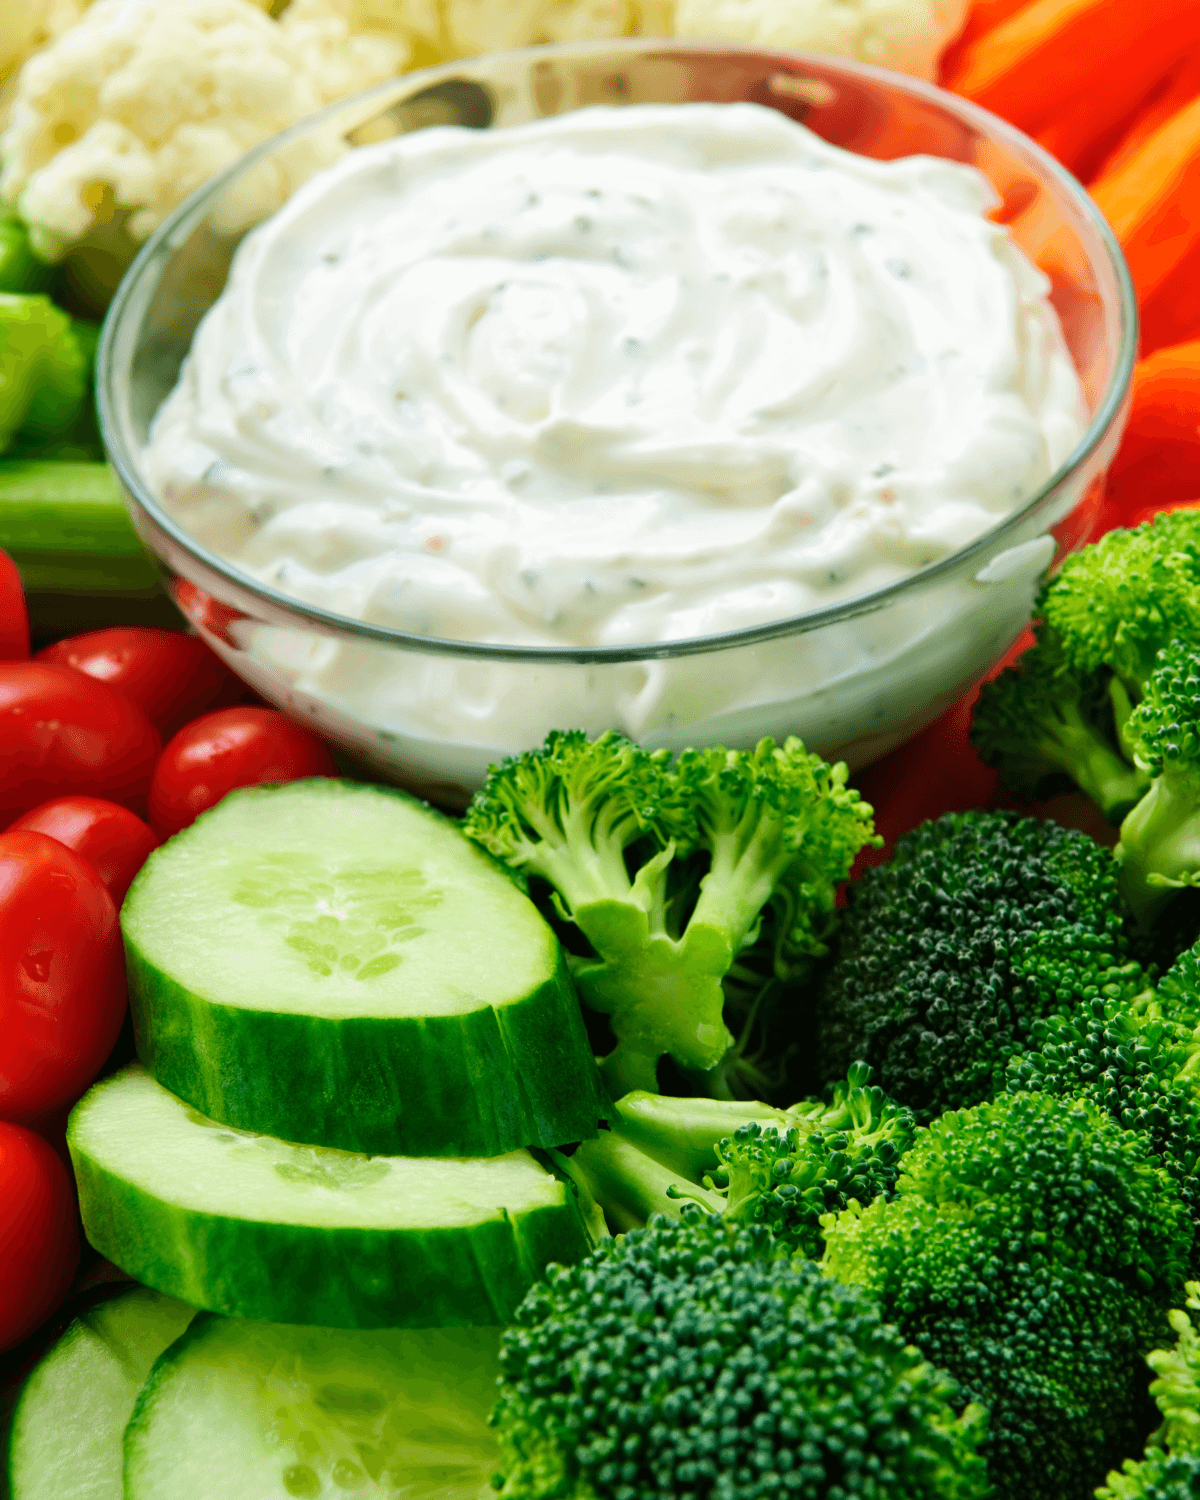 A bowl of Sour Cream Ranch Dip surrounded by vegetables.